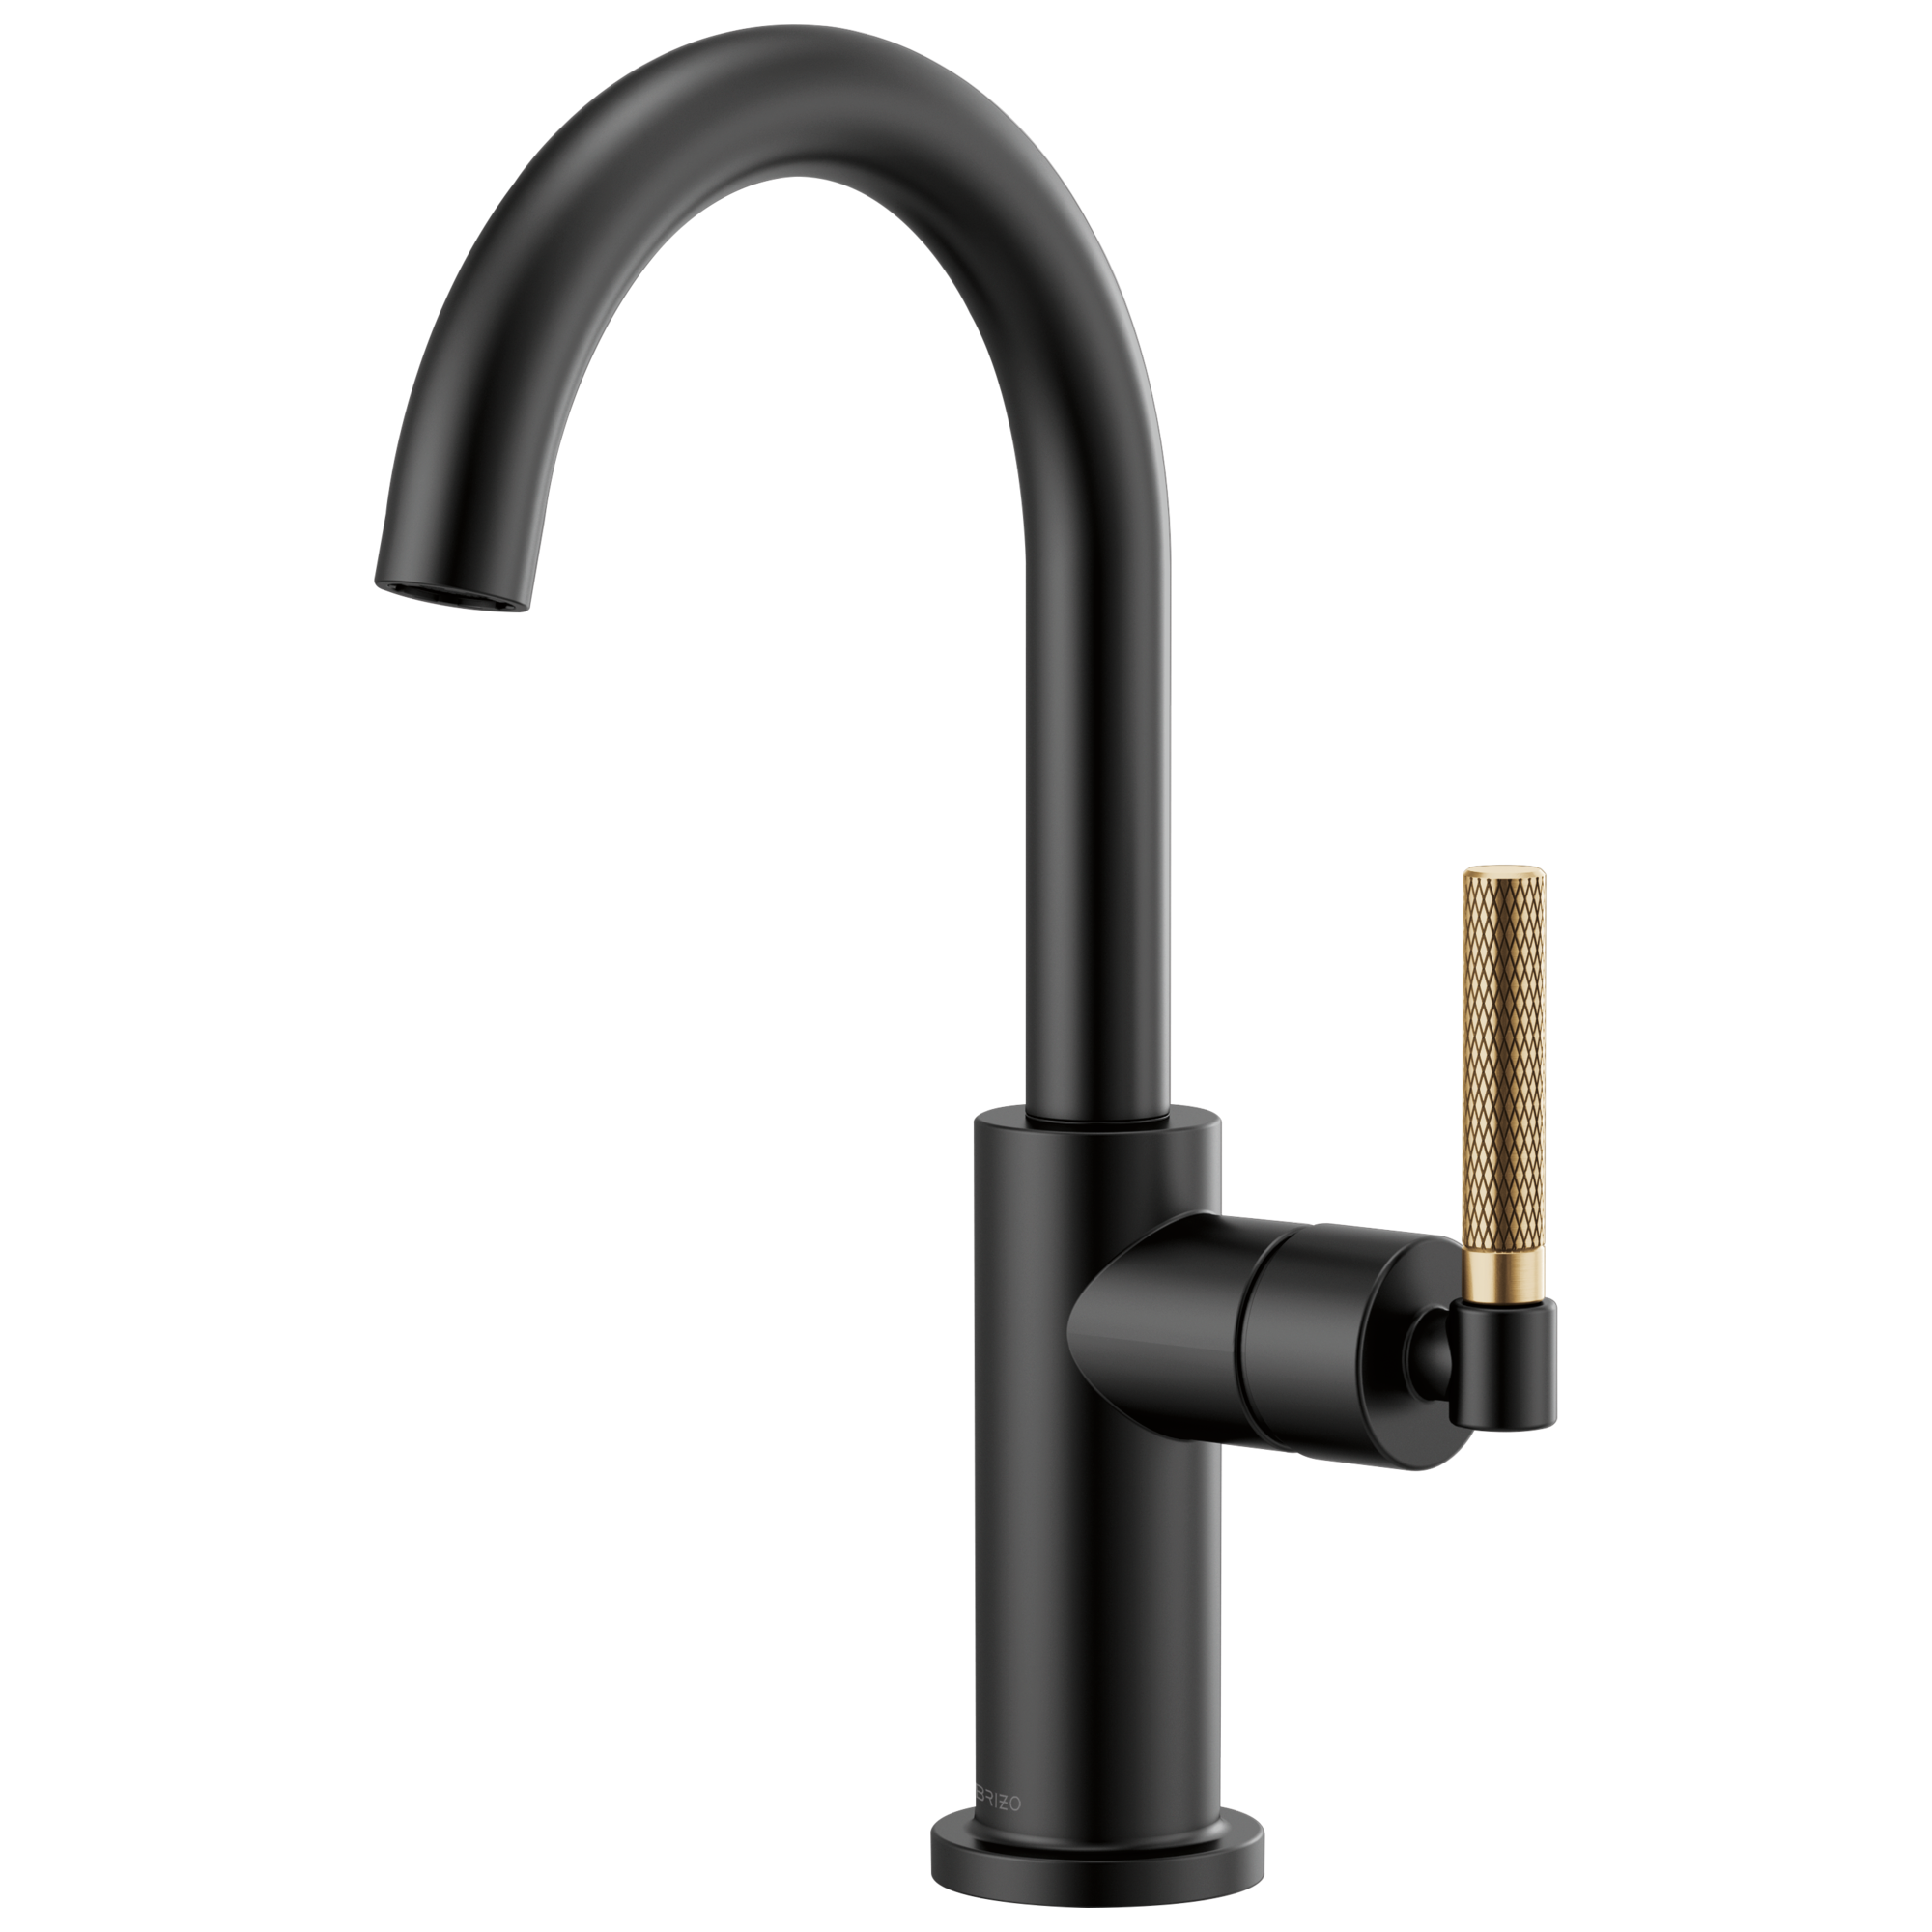 Brizo Litze: Bar Faucet with Arc Spout and Knurled Handle